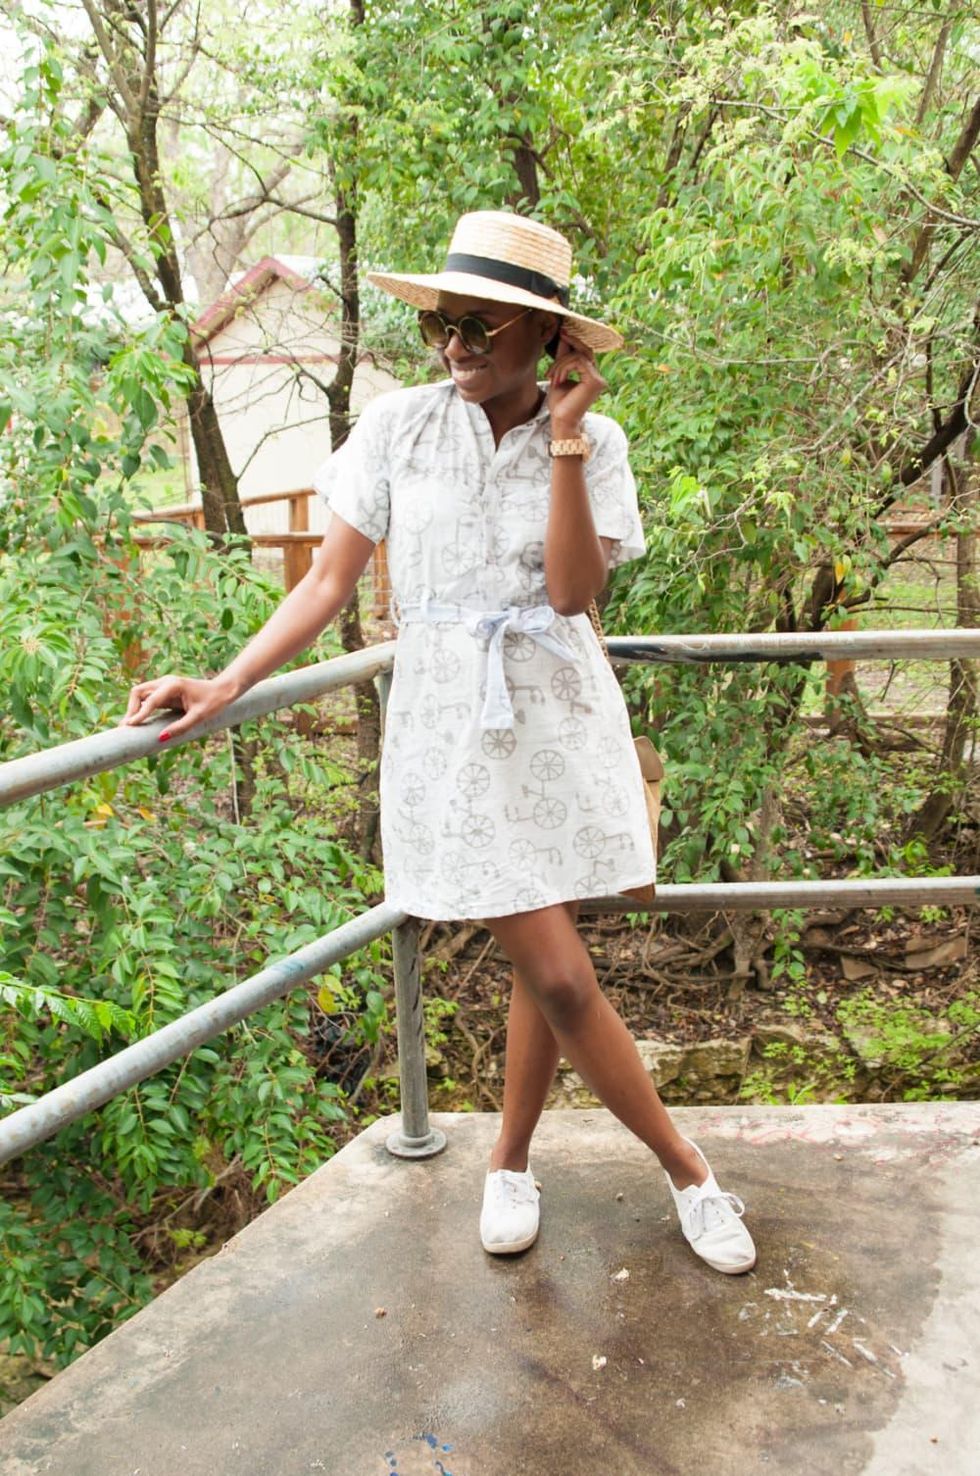 Model wears white dress and white tennis shoes in austin, texas